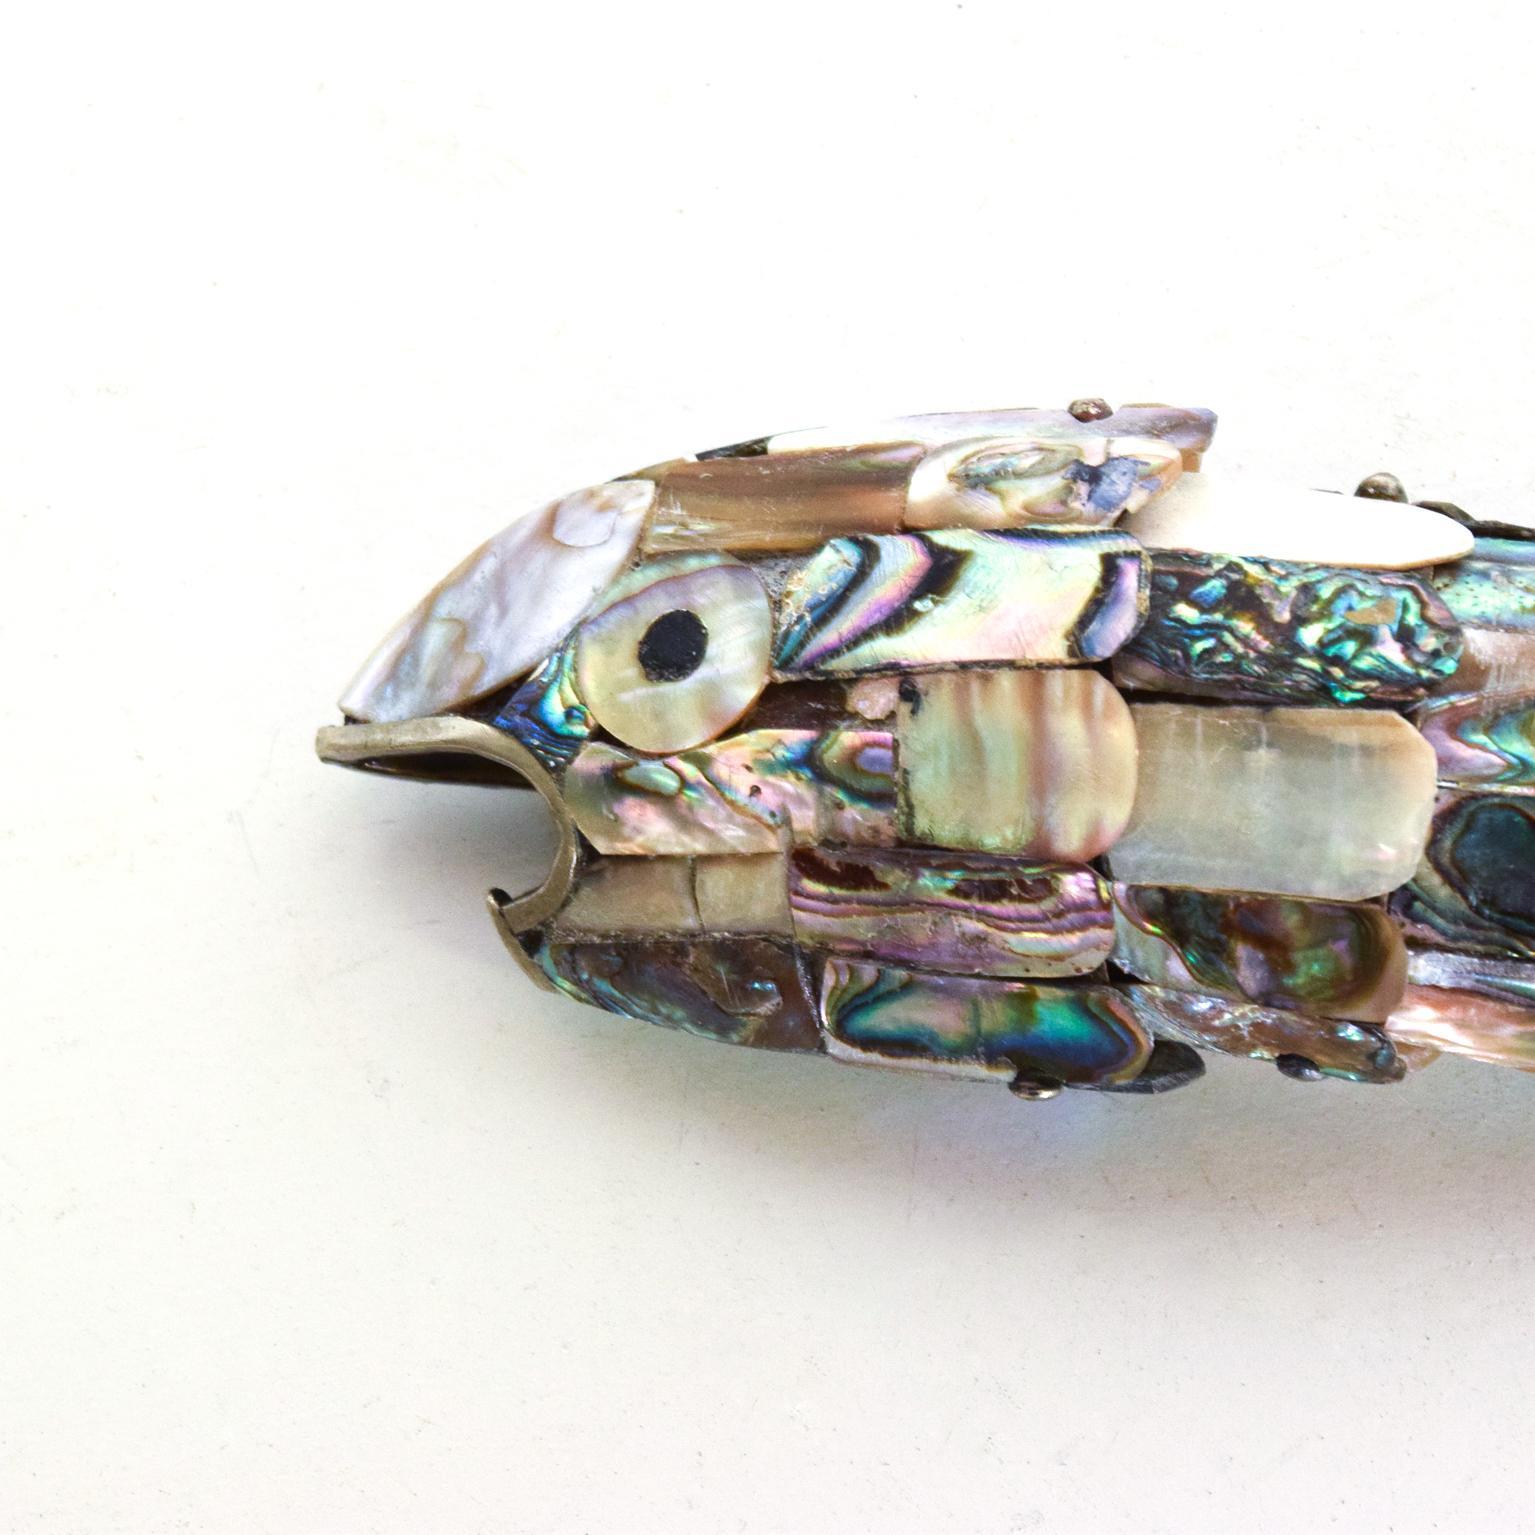 For your consideration, a Mexican Modernist fish abalone bottle opener. Attributed to Los Castillo. No markings present.

Made in Mexico, circa 1970s.

Dimensions: 8